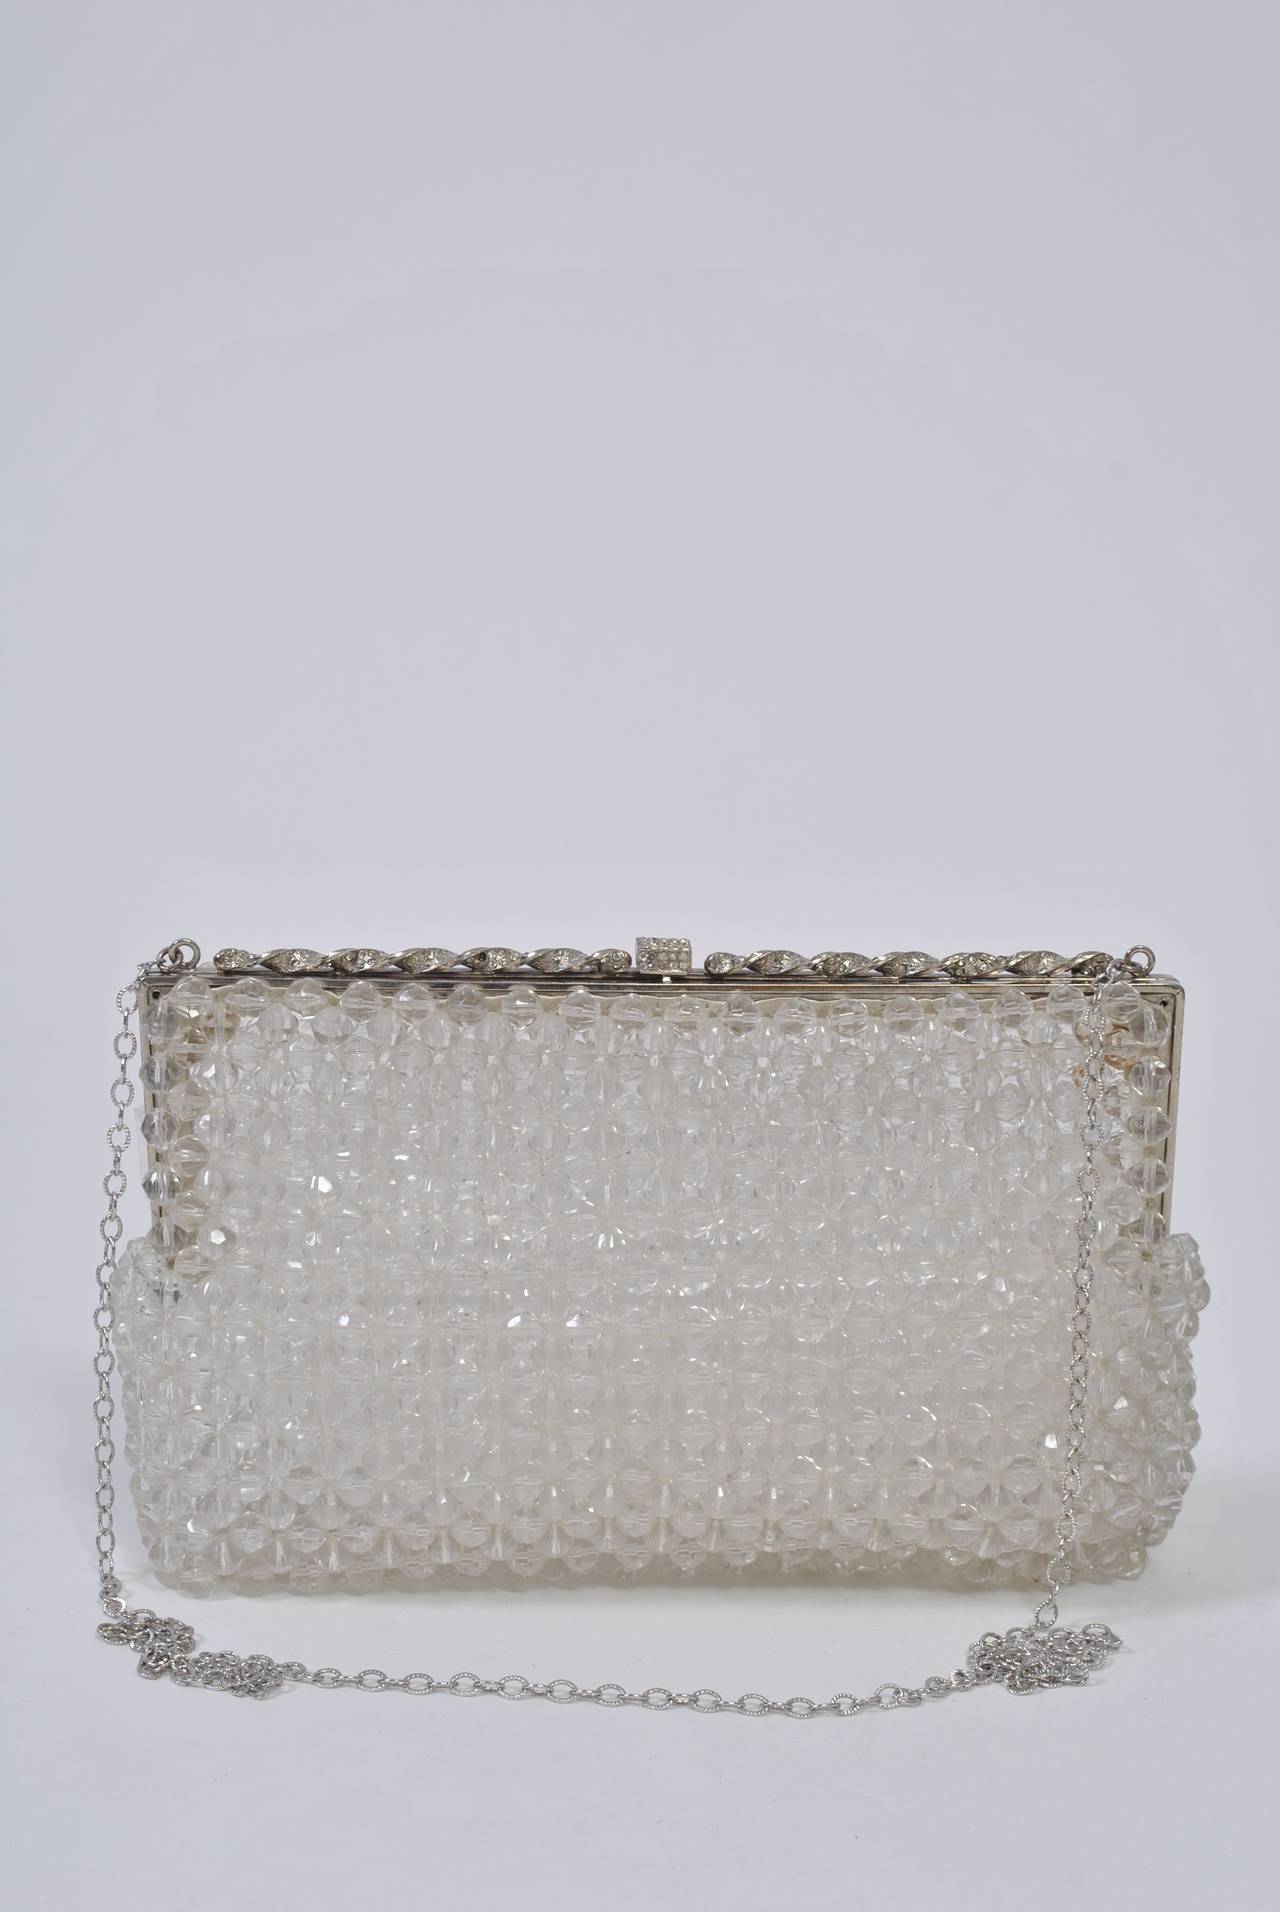 A fun shoulder bag of clear plastic beads aligned vertically and horizontally and having a silver metal frame with a rhinestone-studded twist motif and clasp at top. Long silver chain. Unlined but with satin borders on frame interior.